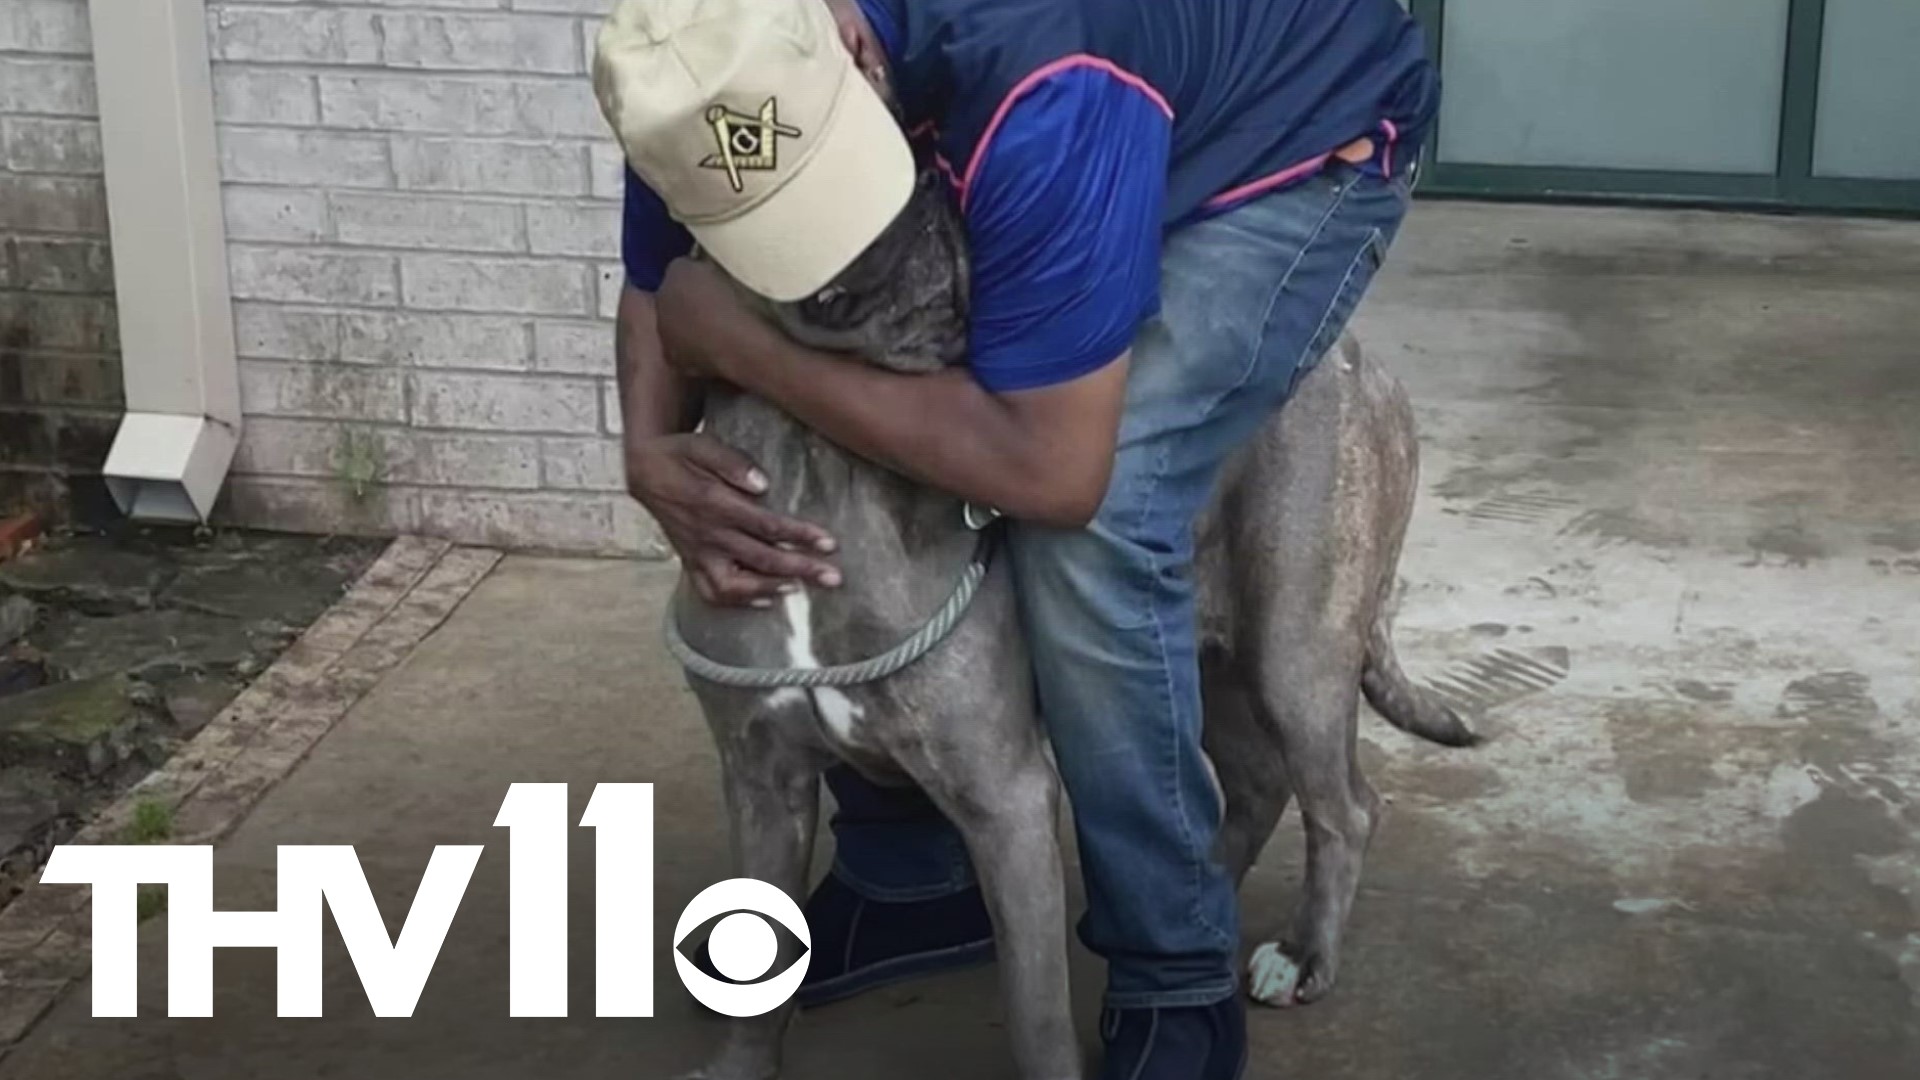 Eleanor, the Neapolitan Mastiff at the Little Rock Animal Village, has been reunited with her owner. Here’s how the reunion happened.